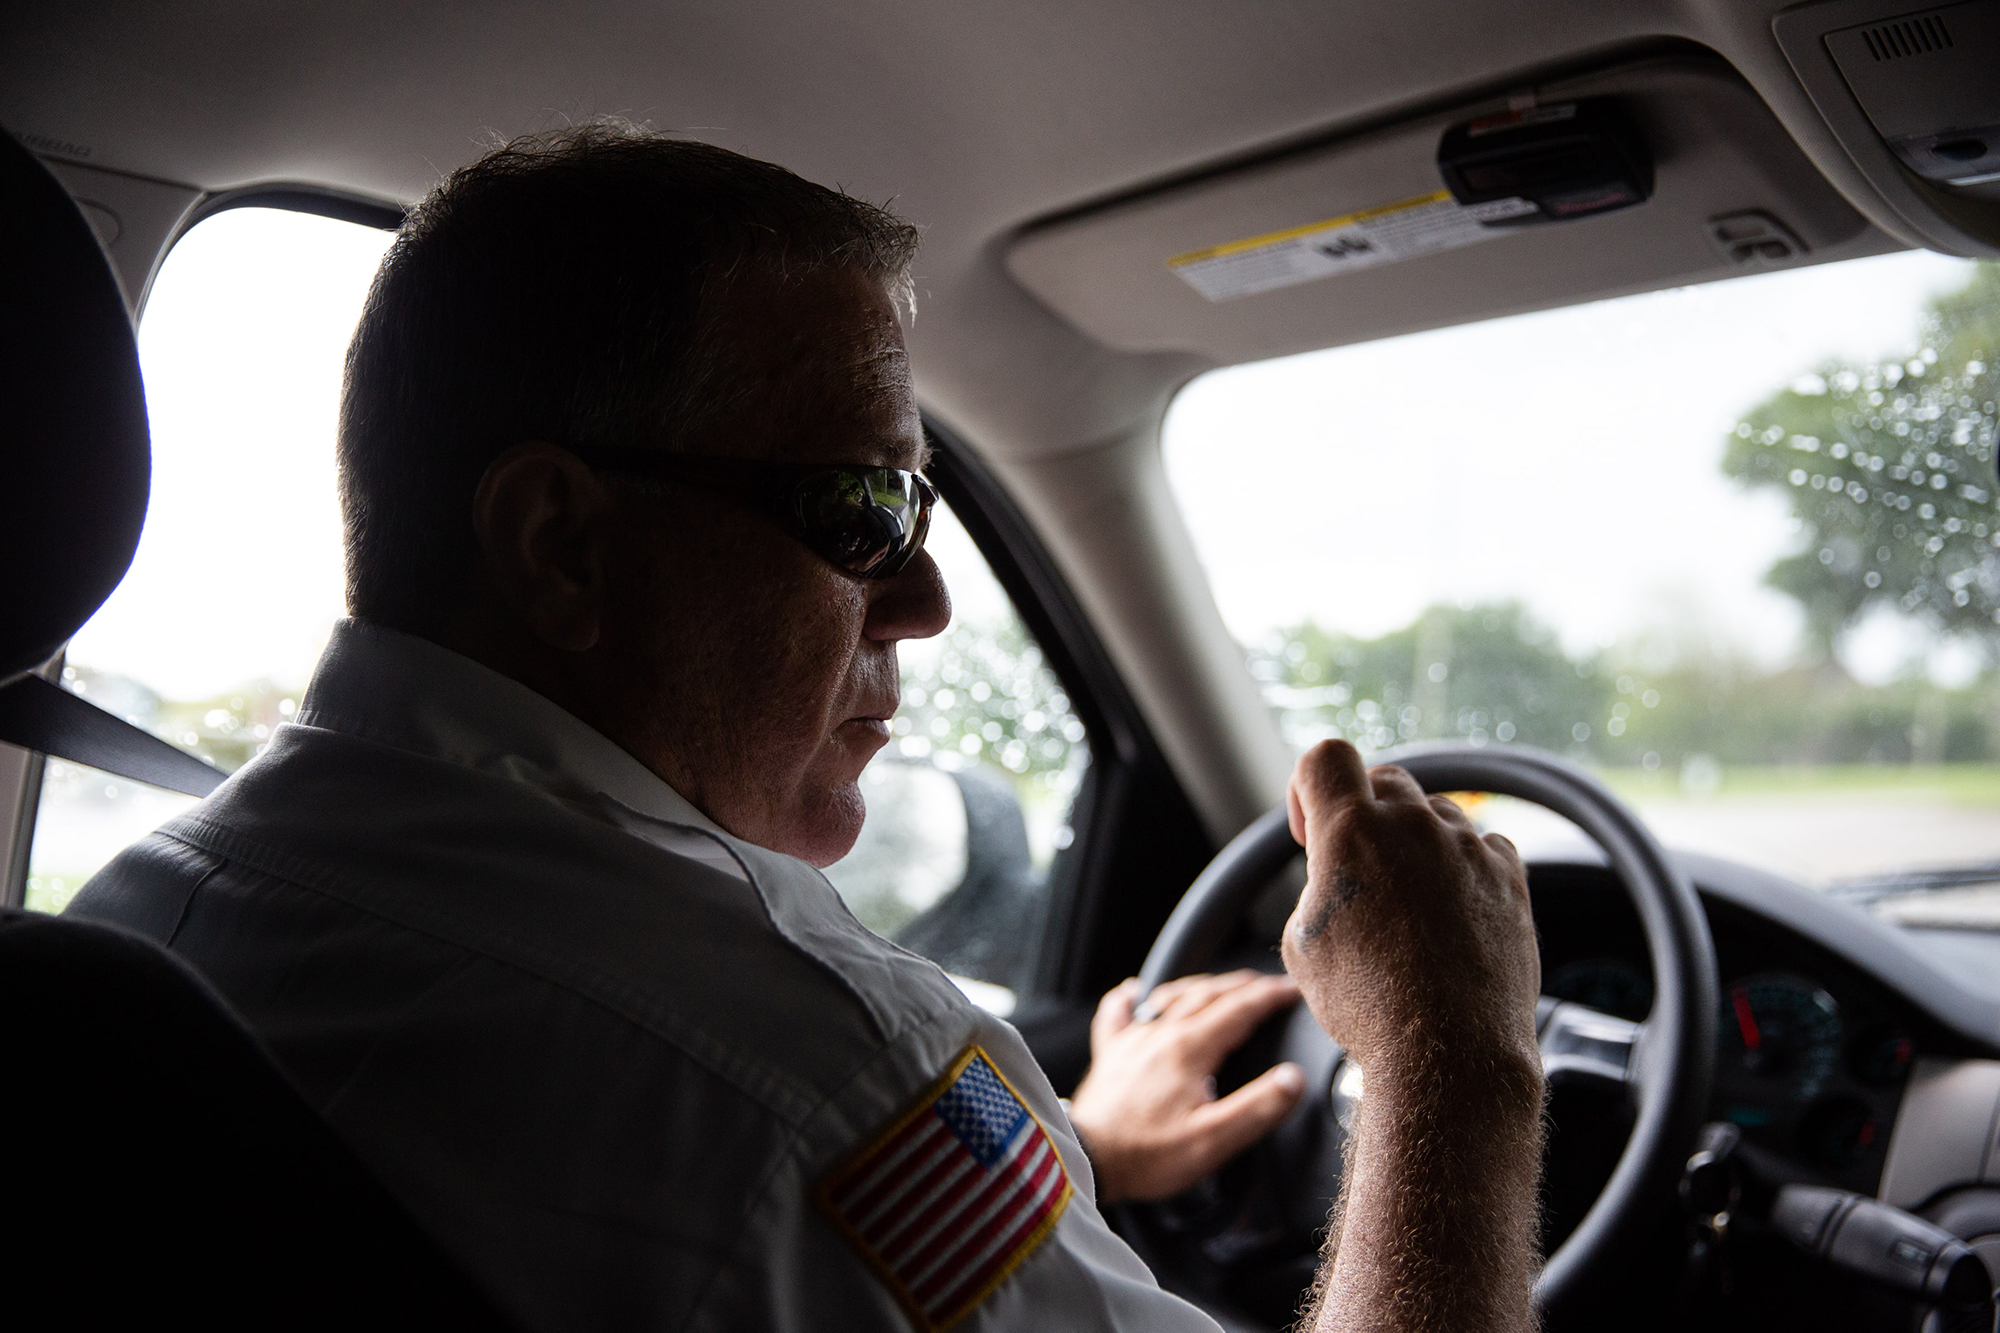 Fire Chief Mike LeBeau always strongly encouraged his wife and children to evacuate when extreme weather approached southern Louisiana. (Ellen O'Brien/News21)